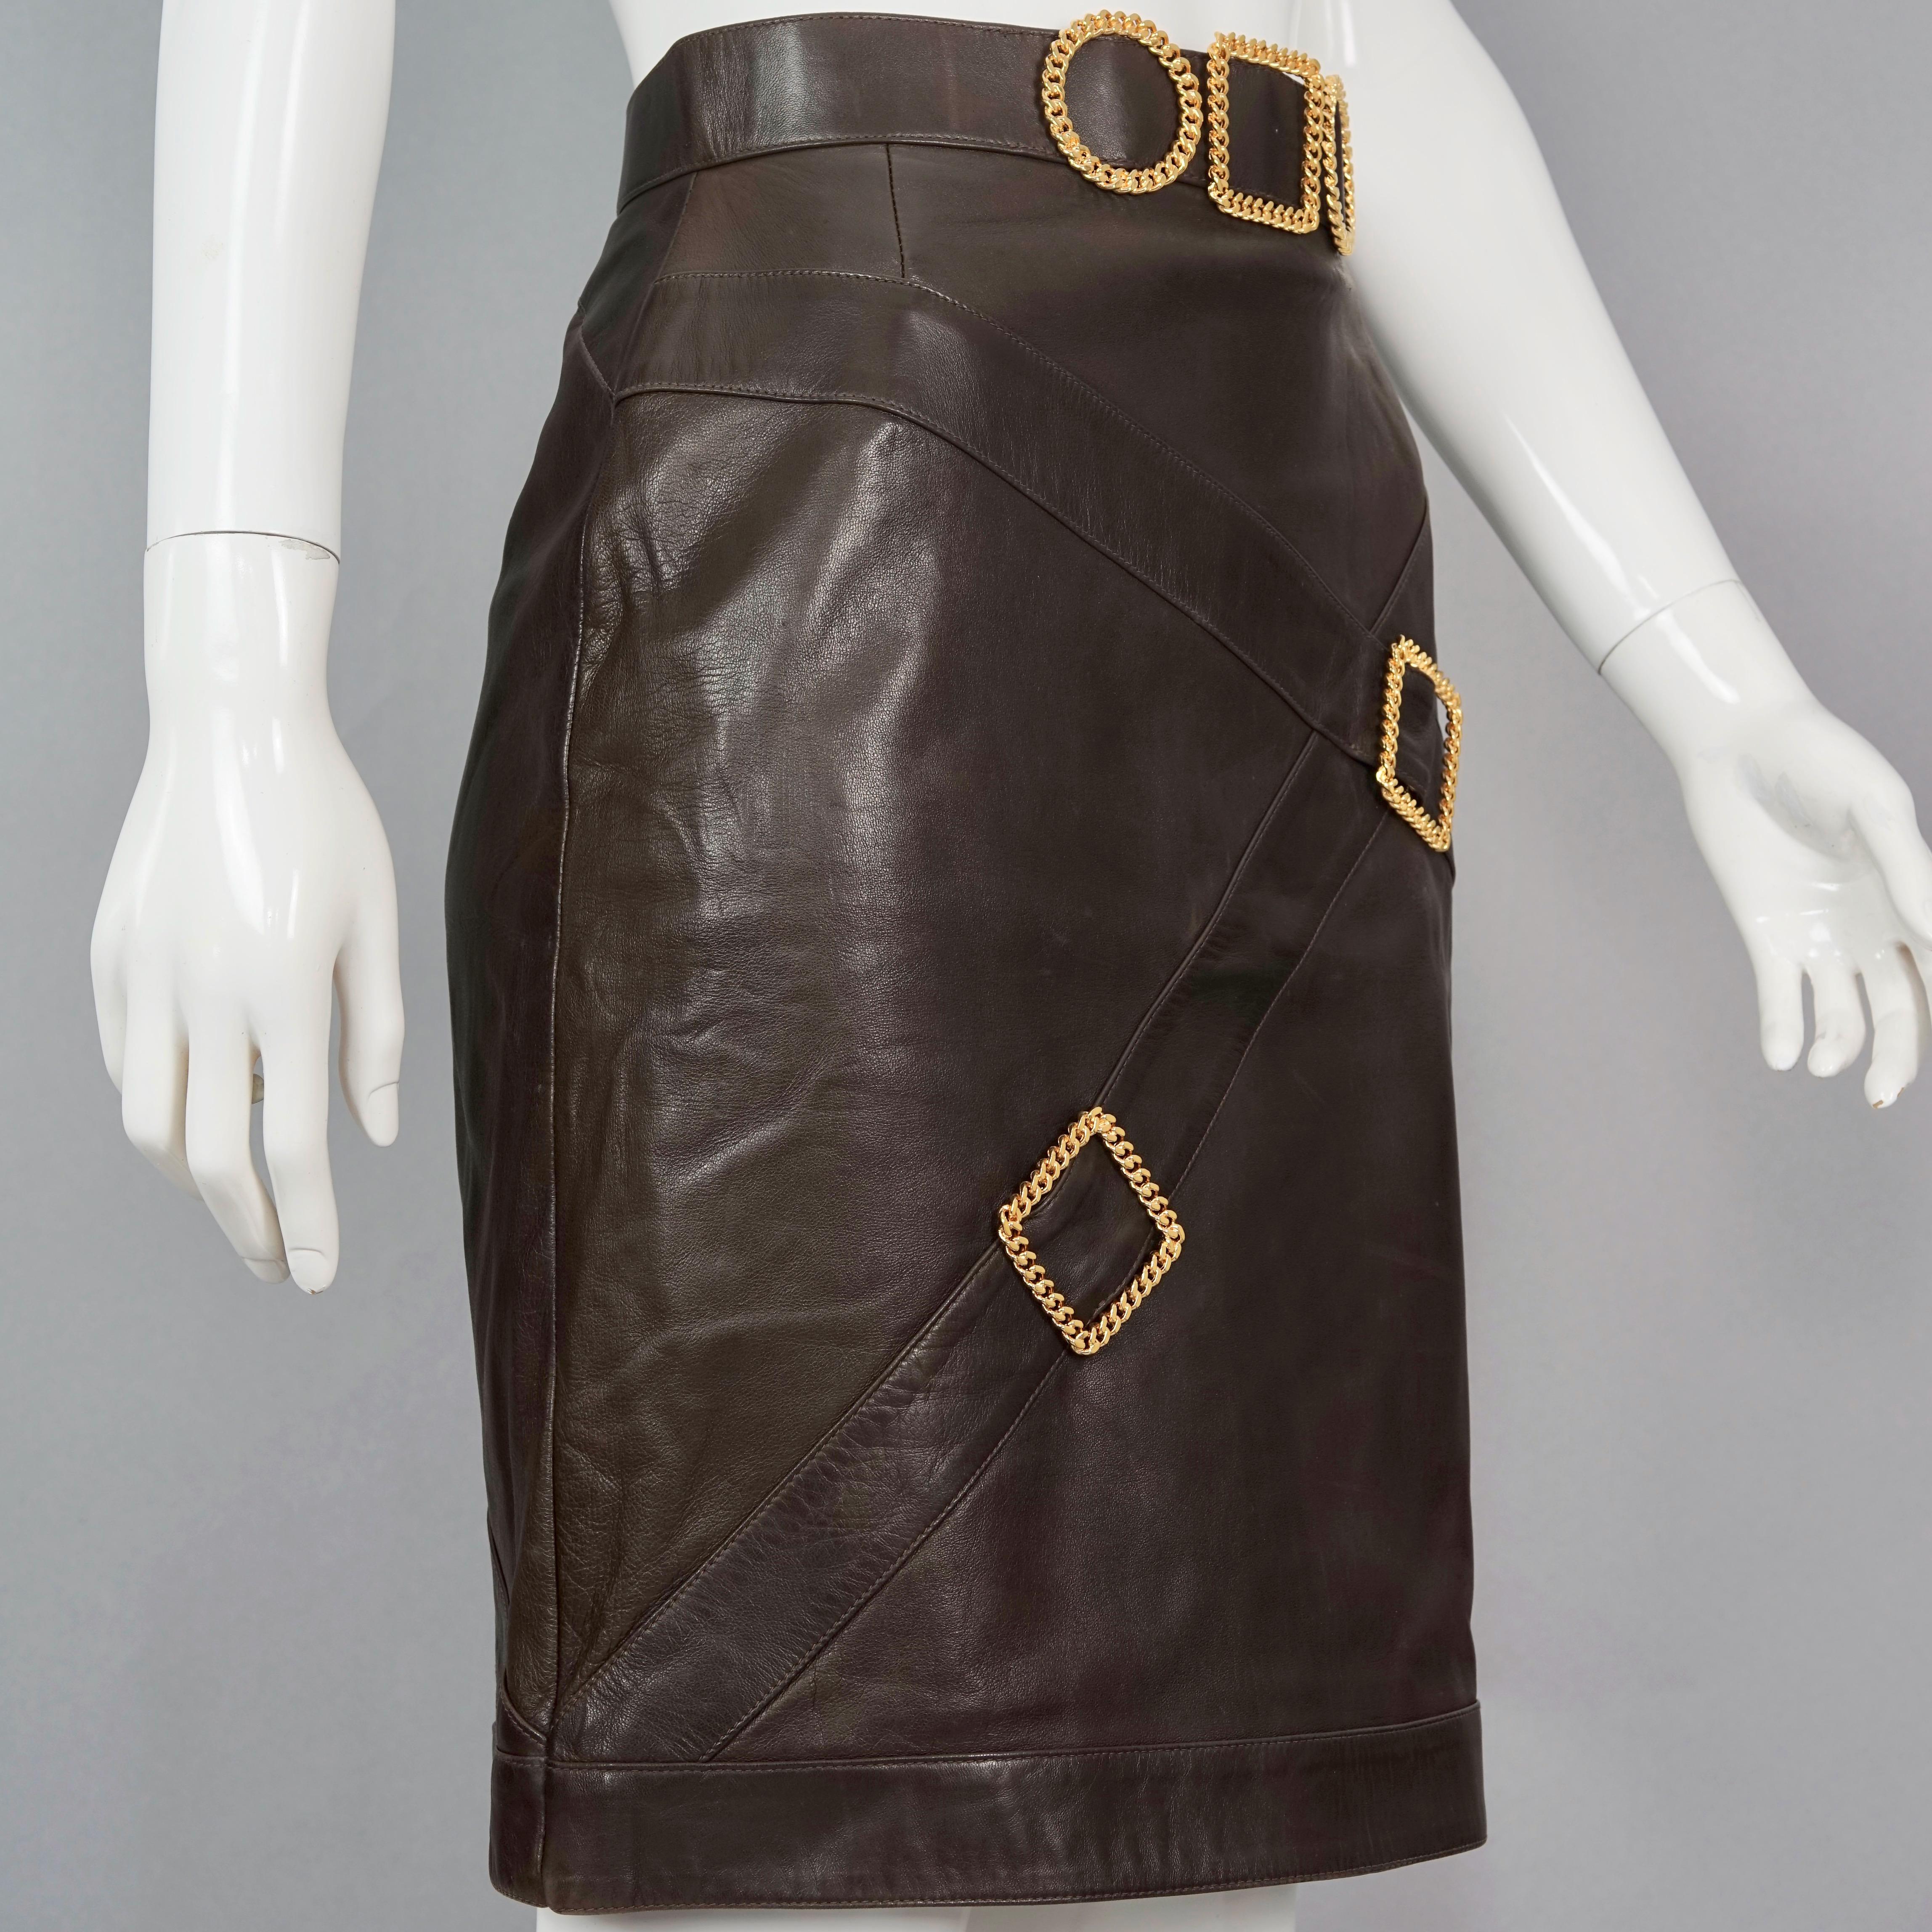 Vintage Iconic CHANEL Buckle Leather Skirt In Excellent Condition For Sale In Kingersheim, Alsace